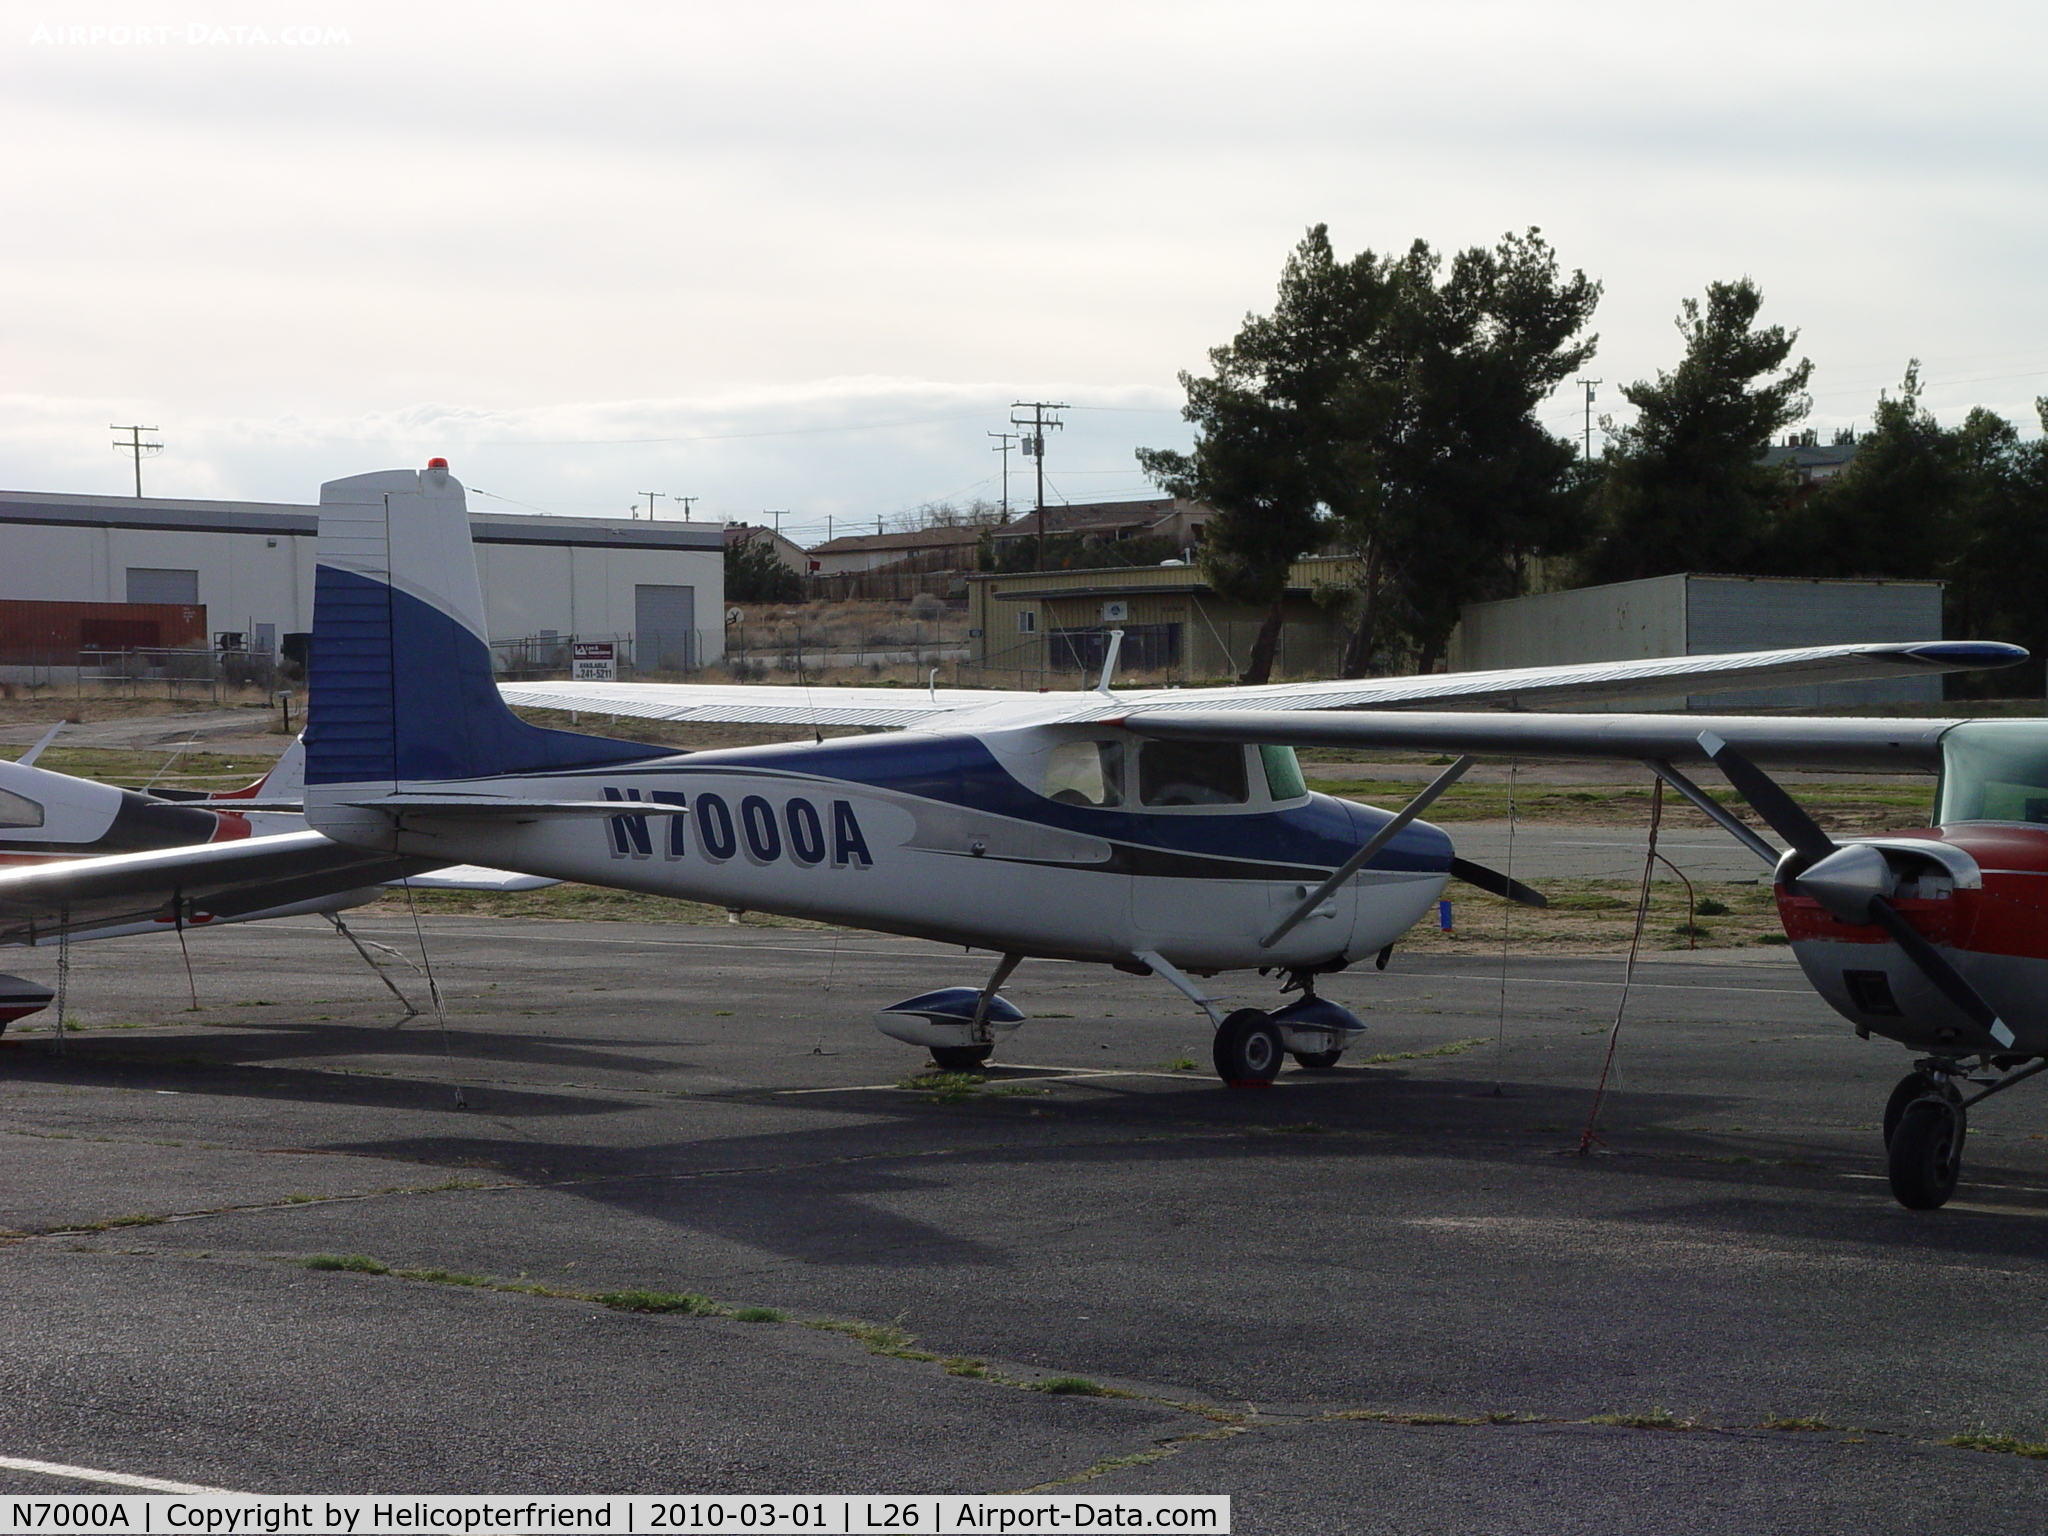 N7000A, 1956 Cessna 172 C/N 29100, Parked at Hesperia Airport